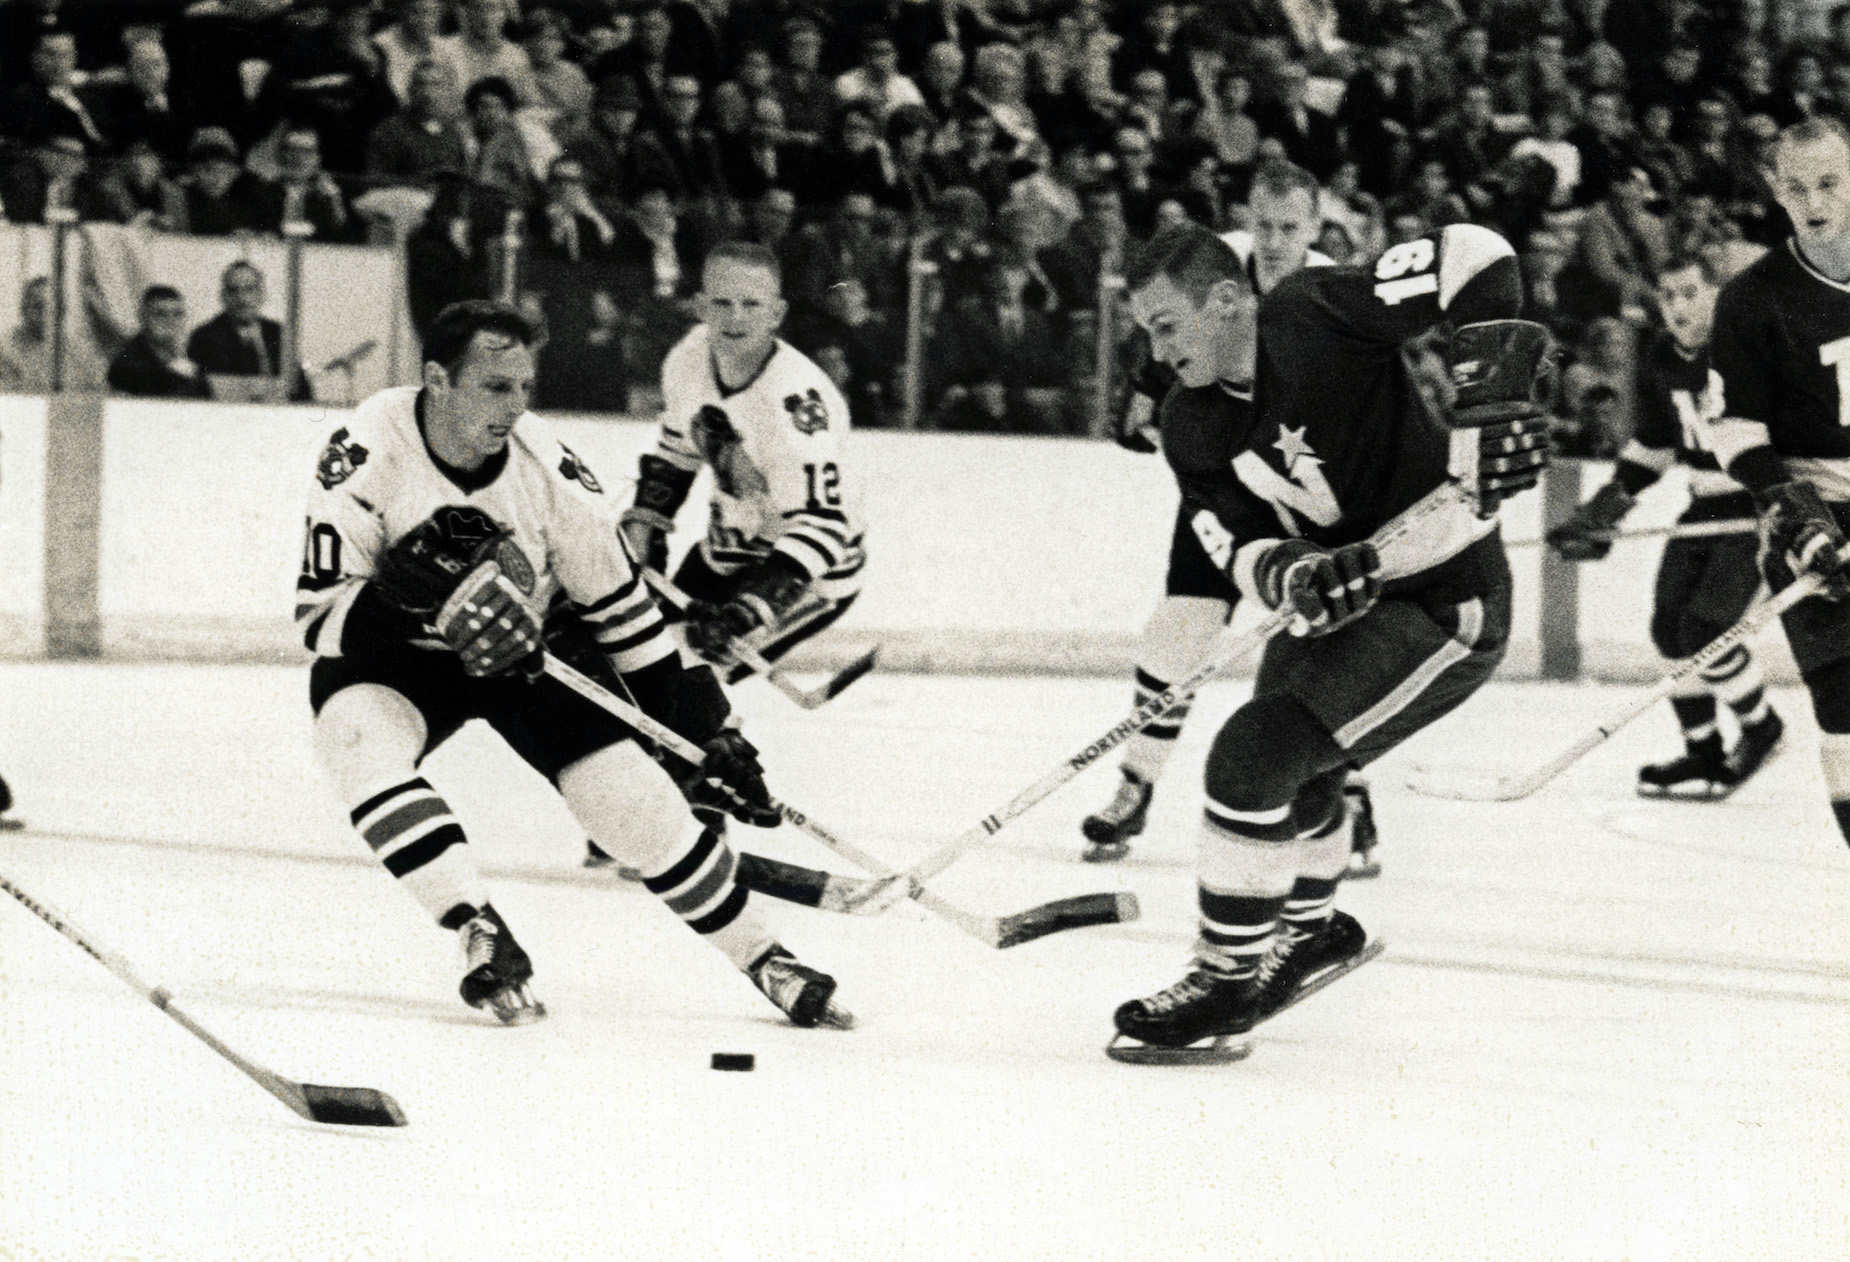 Bill Masterton tragically died after an innocent, on-ice hit.